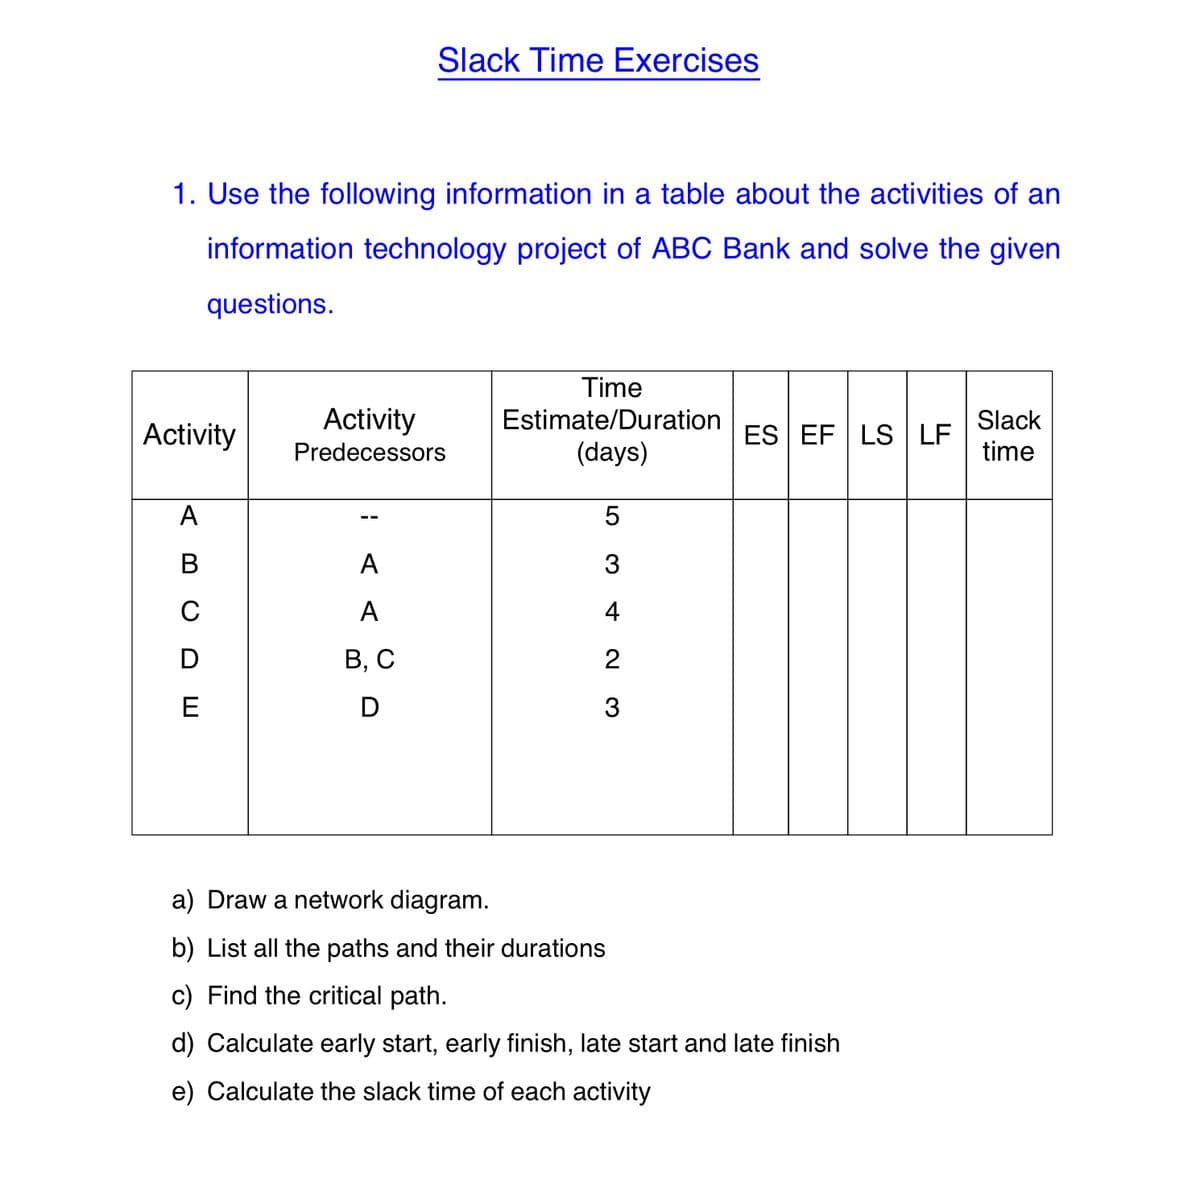 1. Use the following information in a table about the activities of an
information technology project of ABC Bank and solve the given
questions.
Activity
A
B
CD
D
Slack Time Exercises
Activity
Predecessors
A
A
B, C
D
Time
Estimate/Duration
(days)
5
3
4
2
3
ES EF LS LF
a) Draw a network diagram.
b) List all the paths and their durations
c) Find the critical path.
d) Calculate early start, early finish, late start and late finish
e) Calculate the slack time of each activity
Slack
time